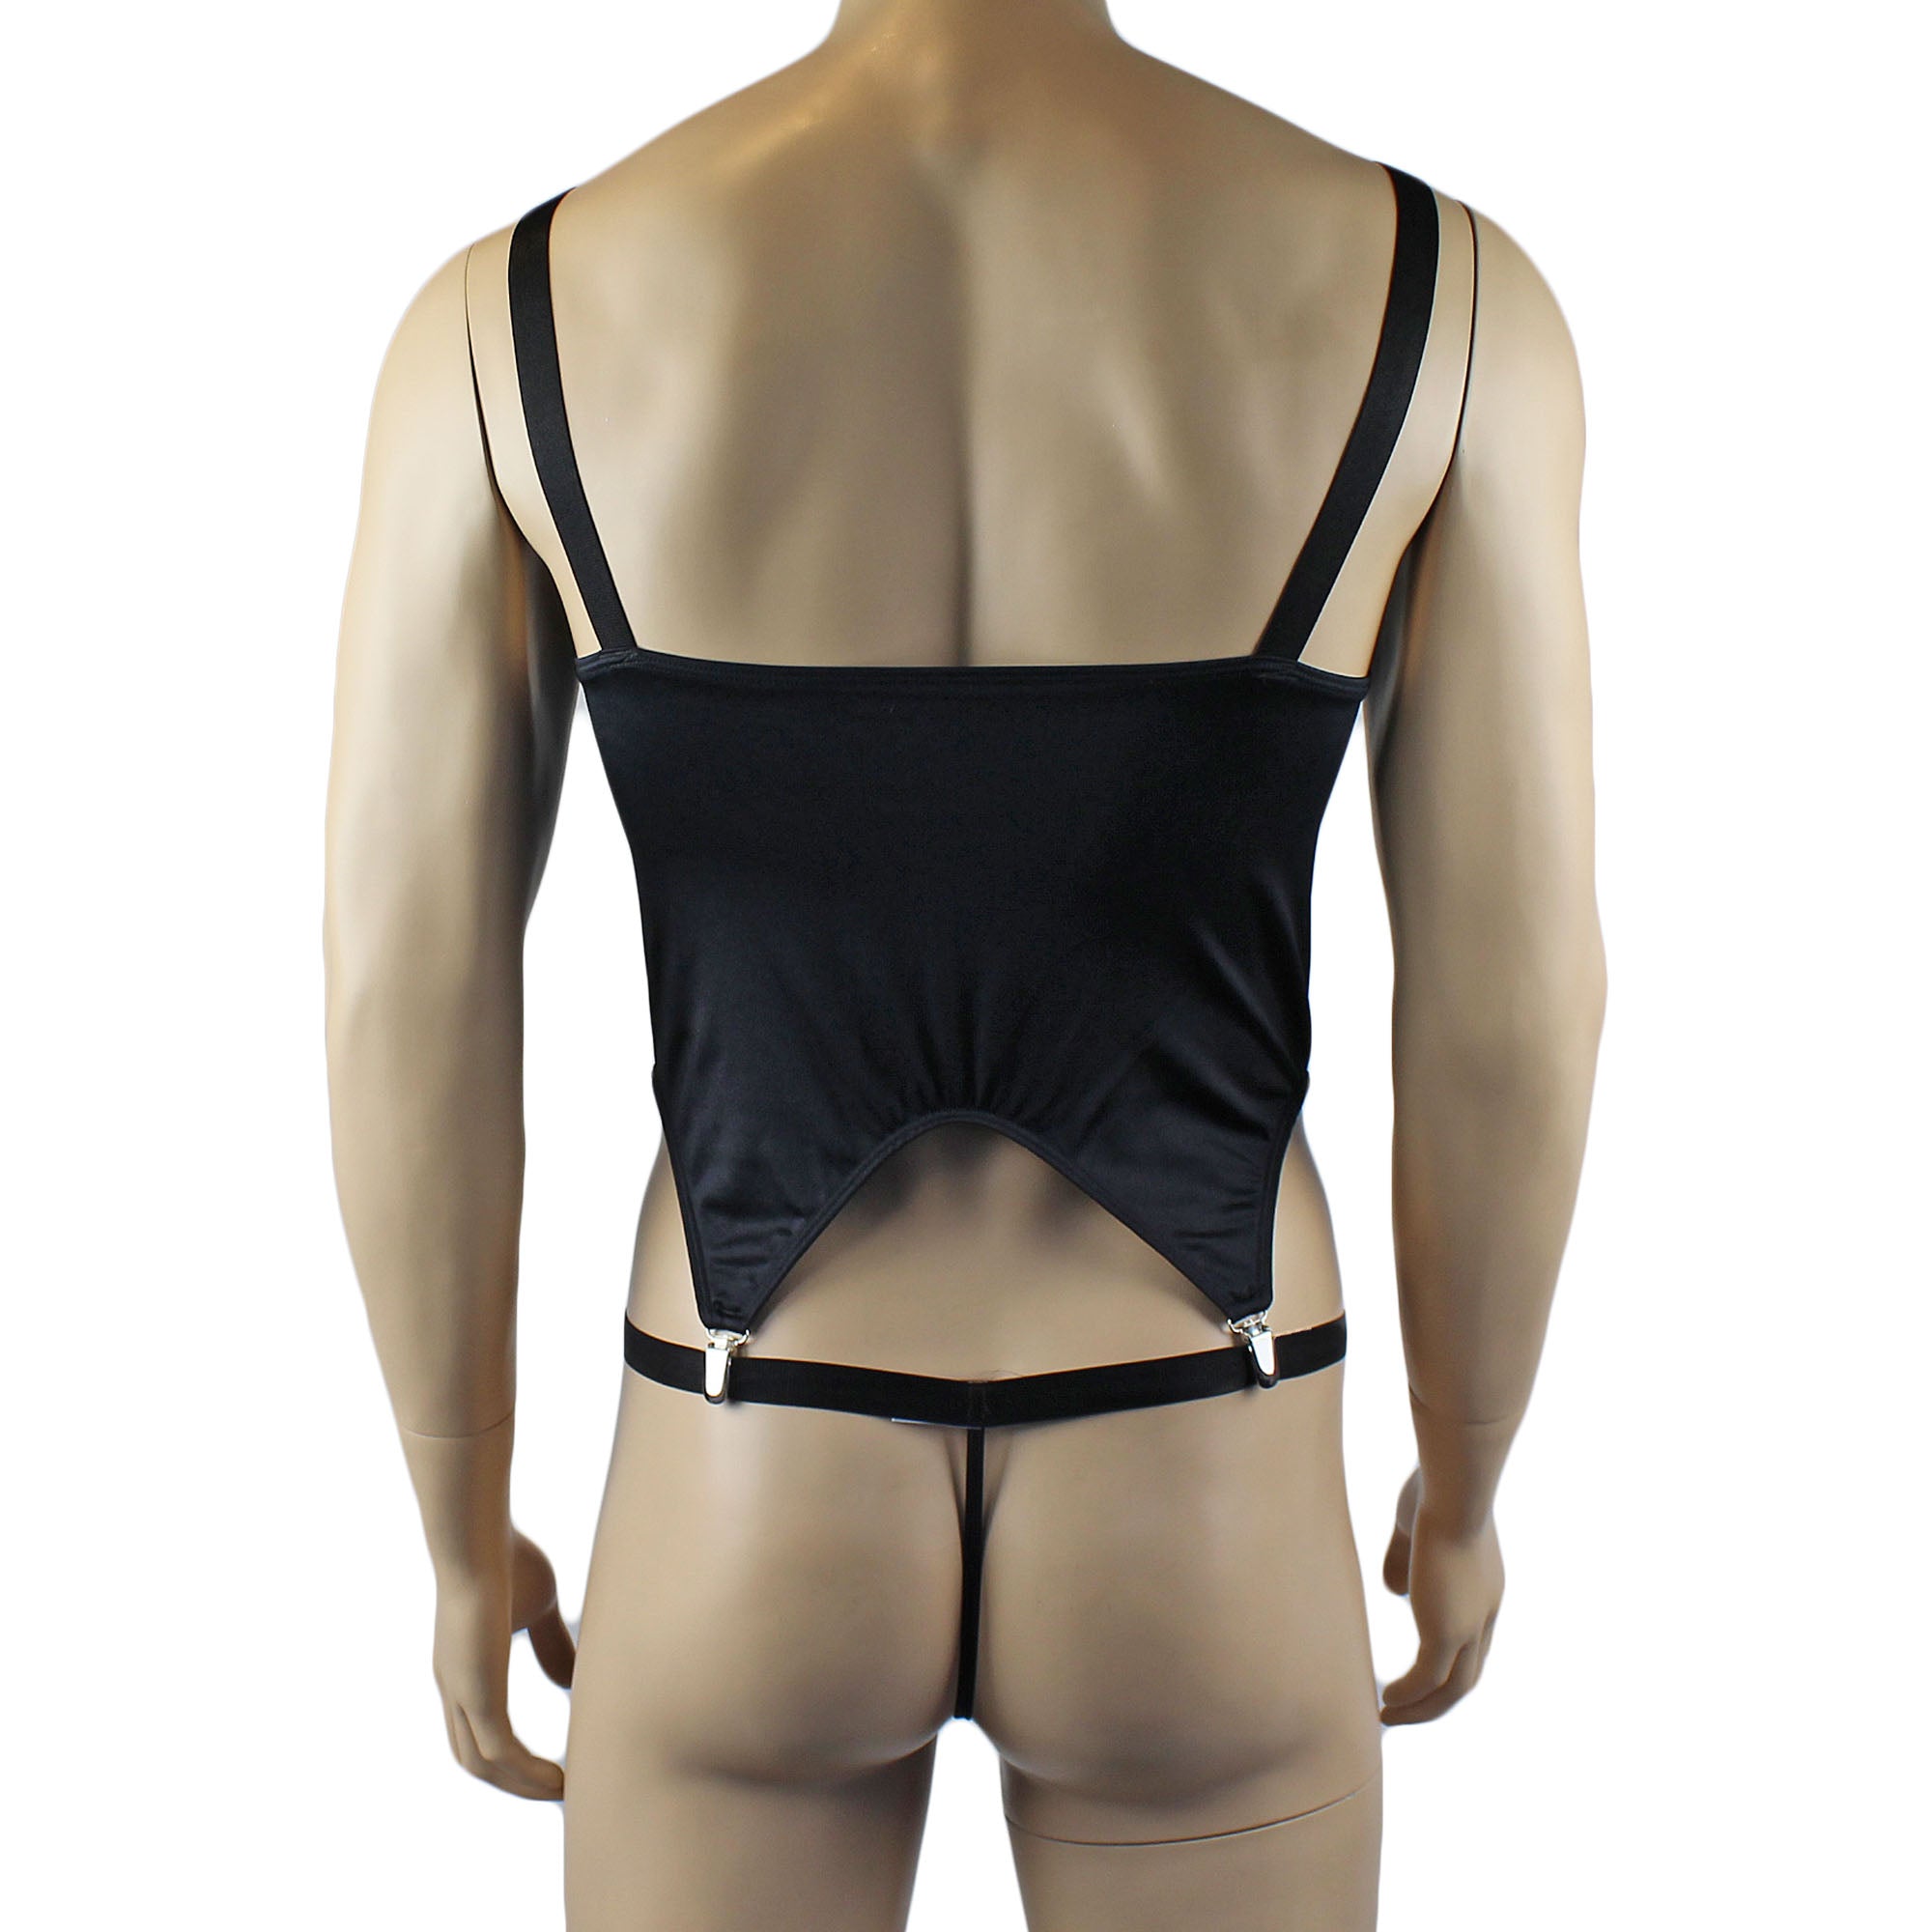 Mens Janice Corset Top, Thong and comes with Detachable Garters & Leg Bands - Sizes up to 3XL